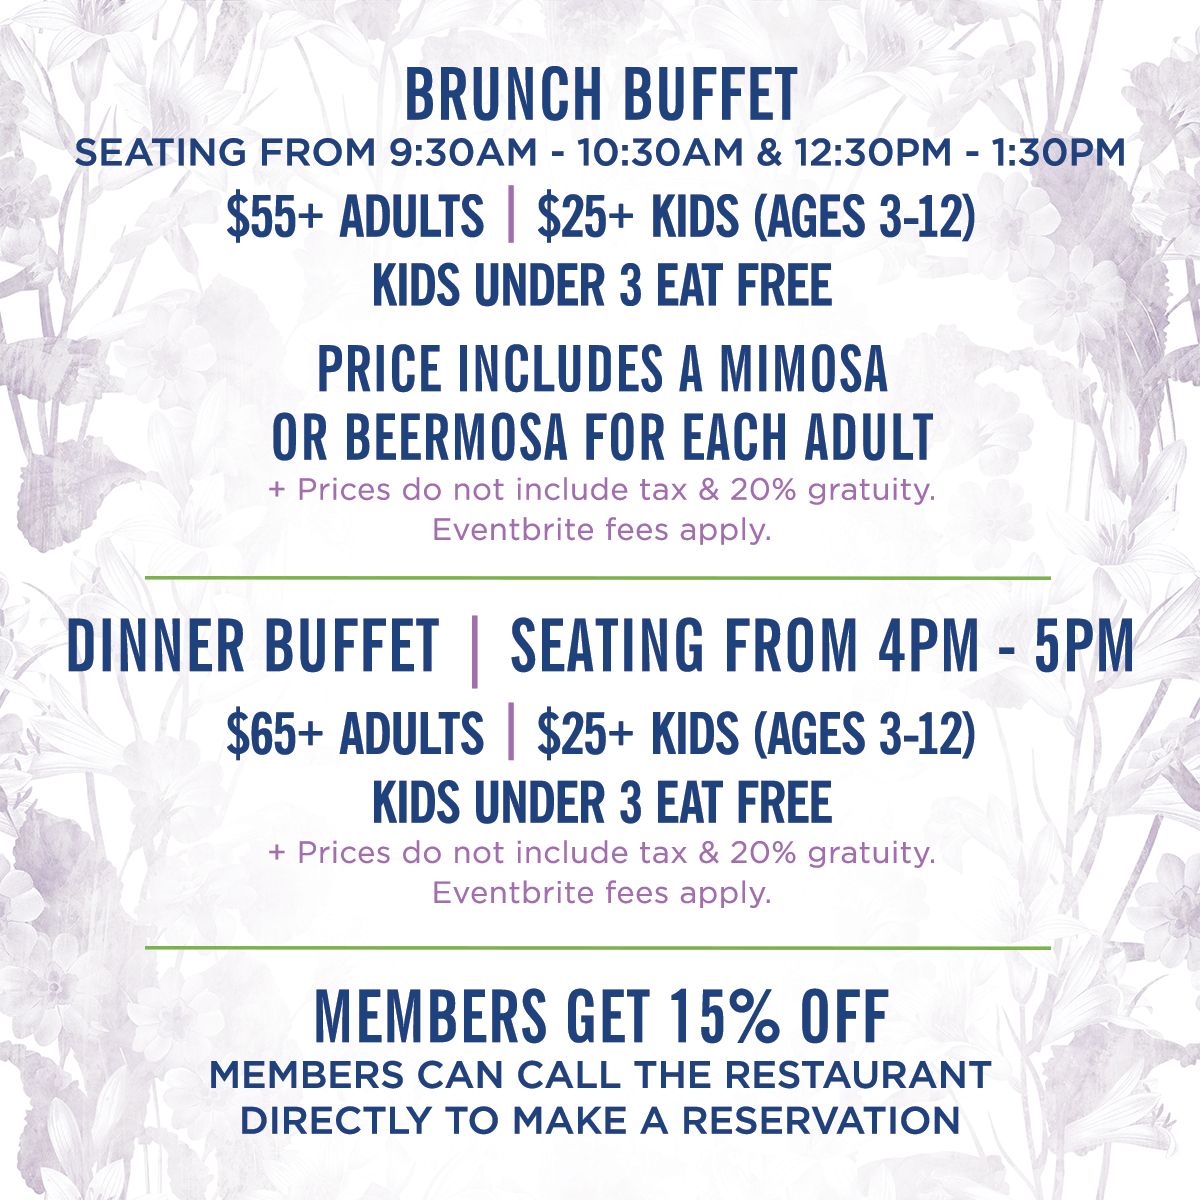 Join us at Scotland Run Golf Club this Easter Sunday for our delicious Brunch or Dinner Buffet. The Easter Bunny himself will be hopping on by to meet everyone! 🐰 Get your tickets now: brnw.ch/21wGJKl